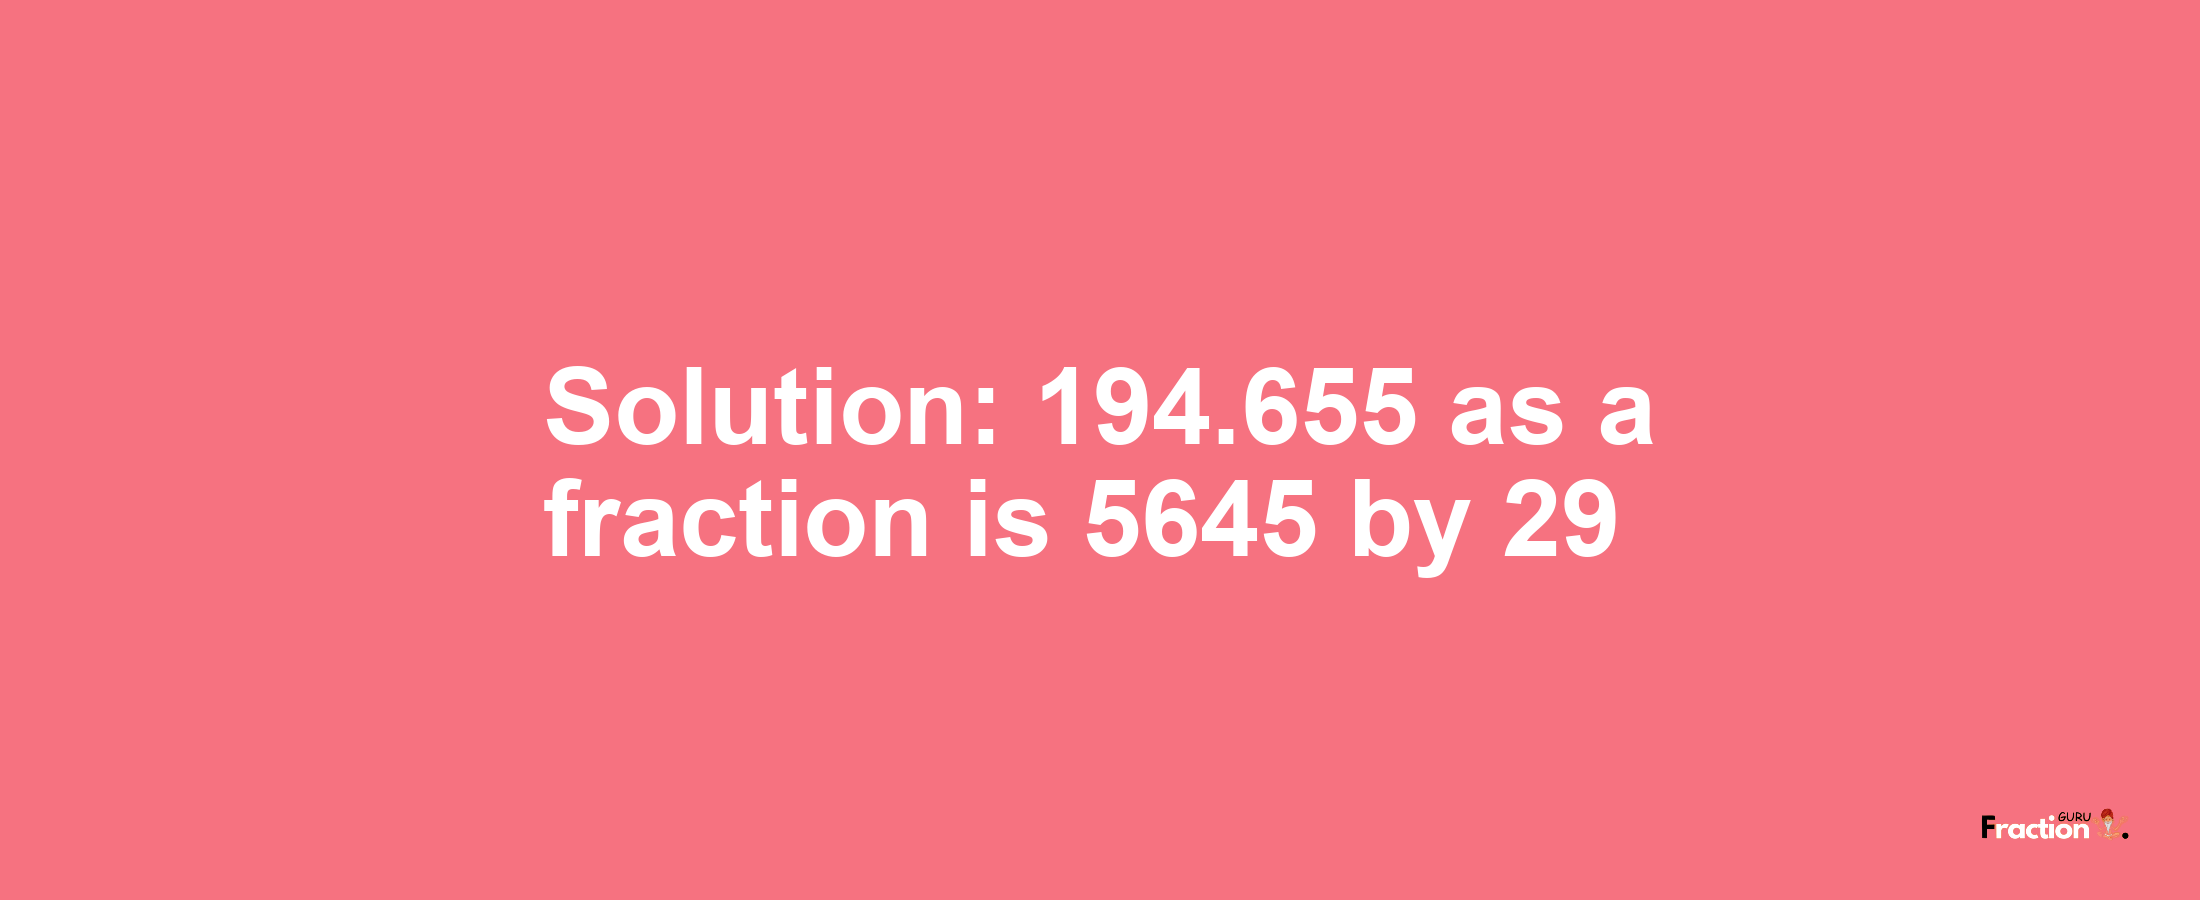 Solution:194.655 as a fraction is 5645/29